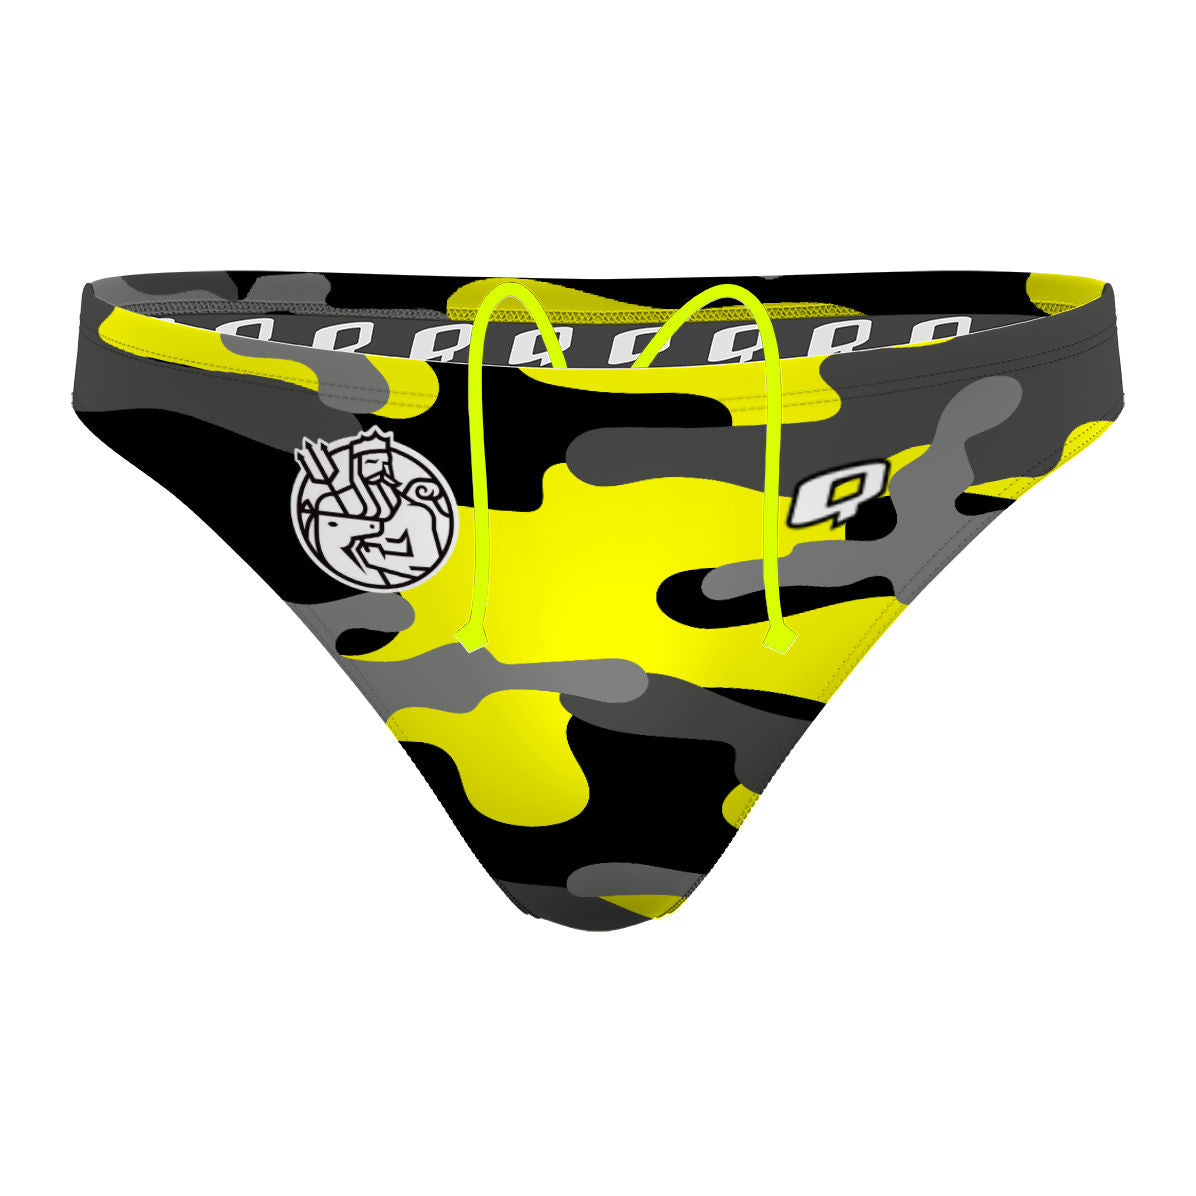 Yellow Camo - Waterpolo Brief Swimsuit